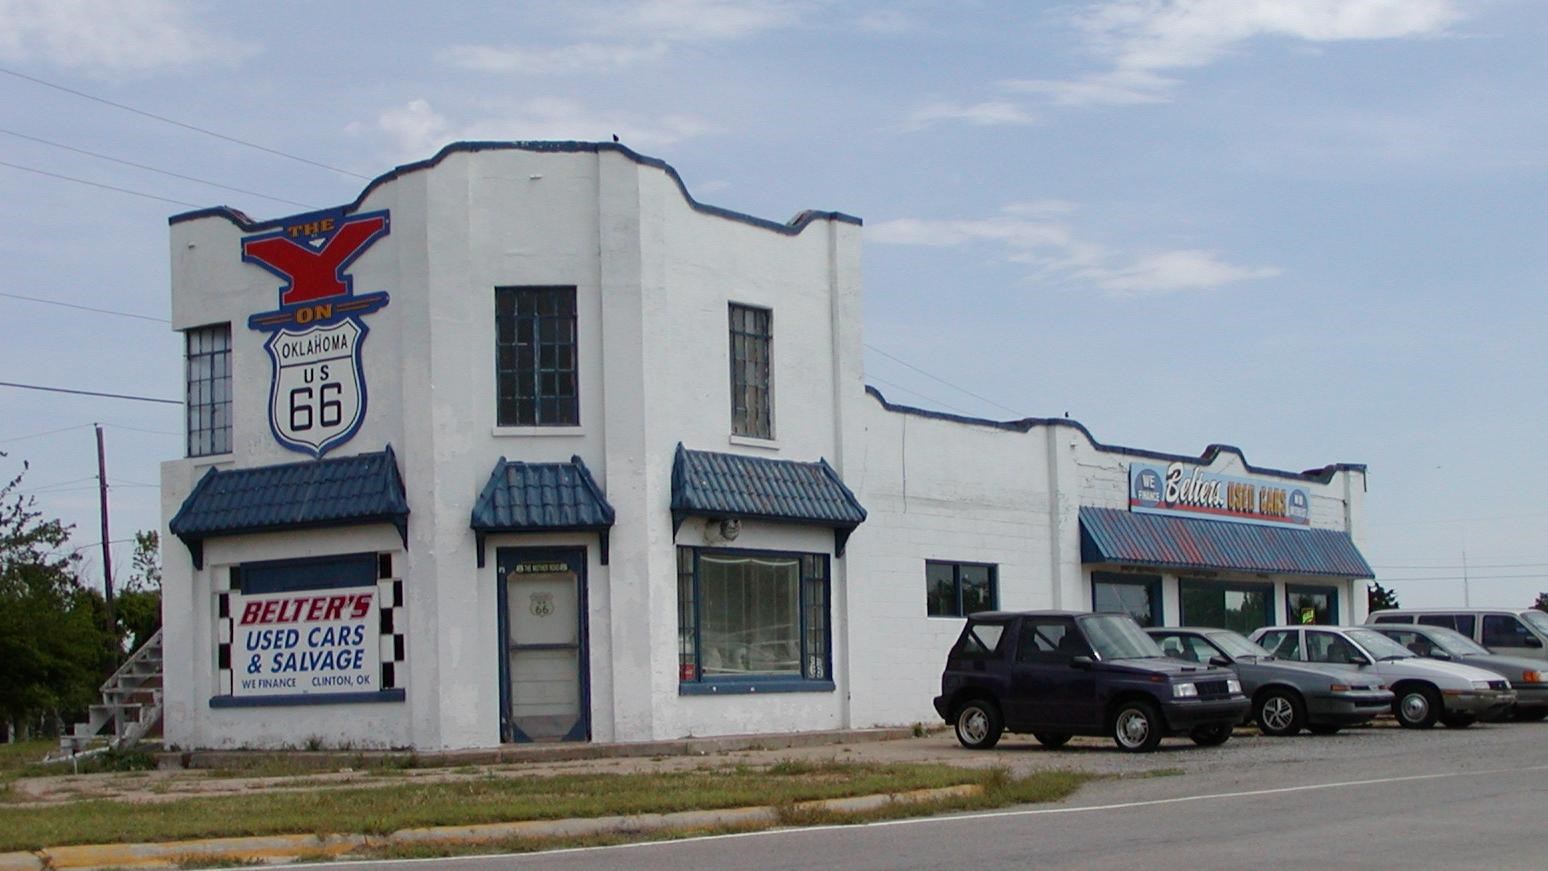 A two story white building with blue trim and awnings over the windows. On the side is a red 